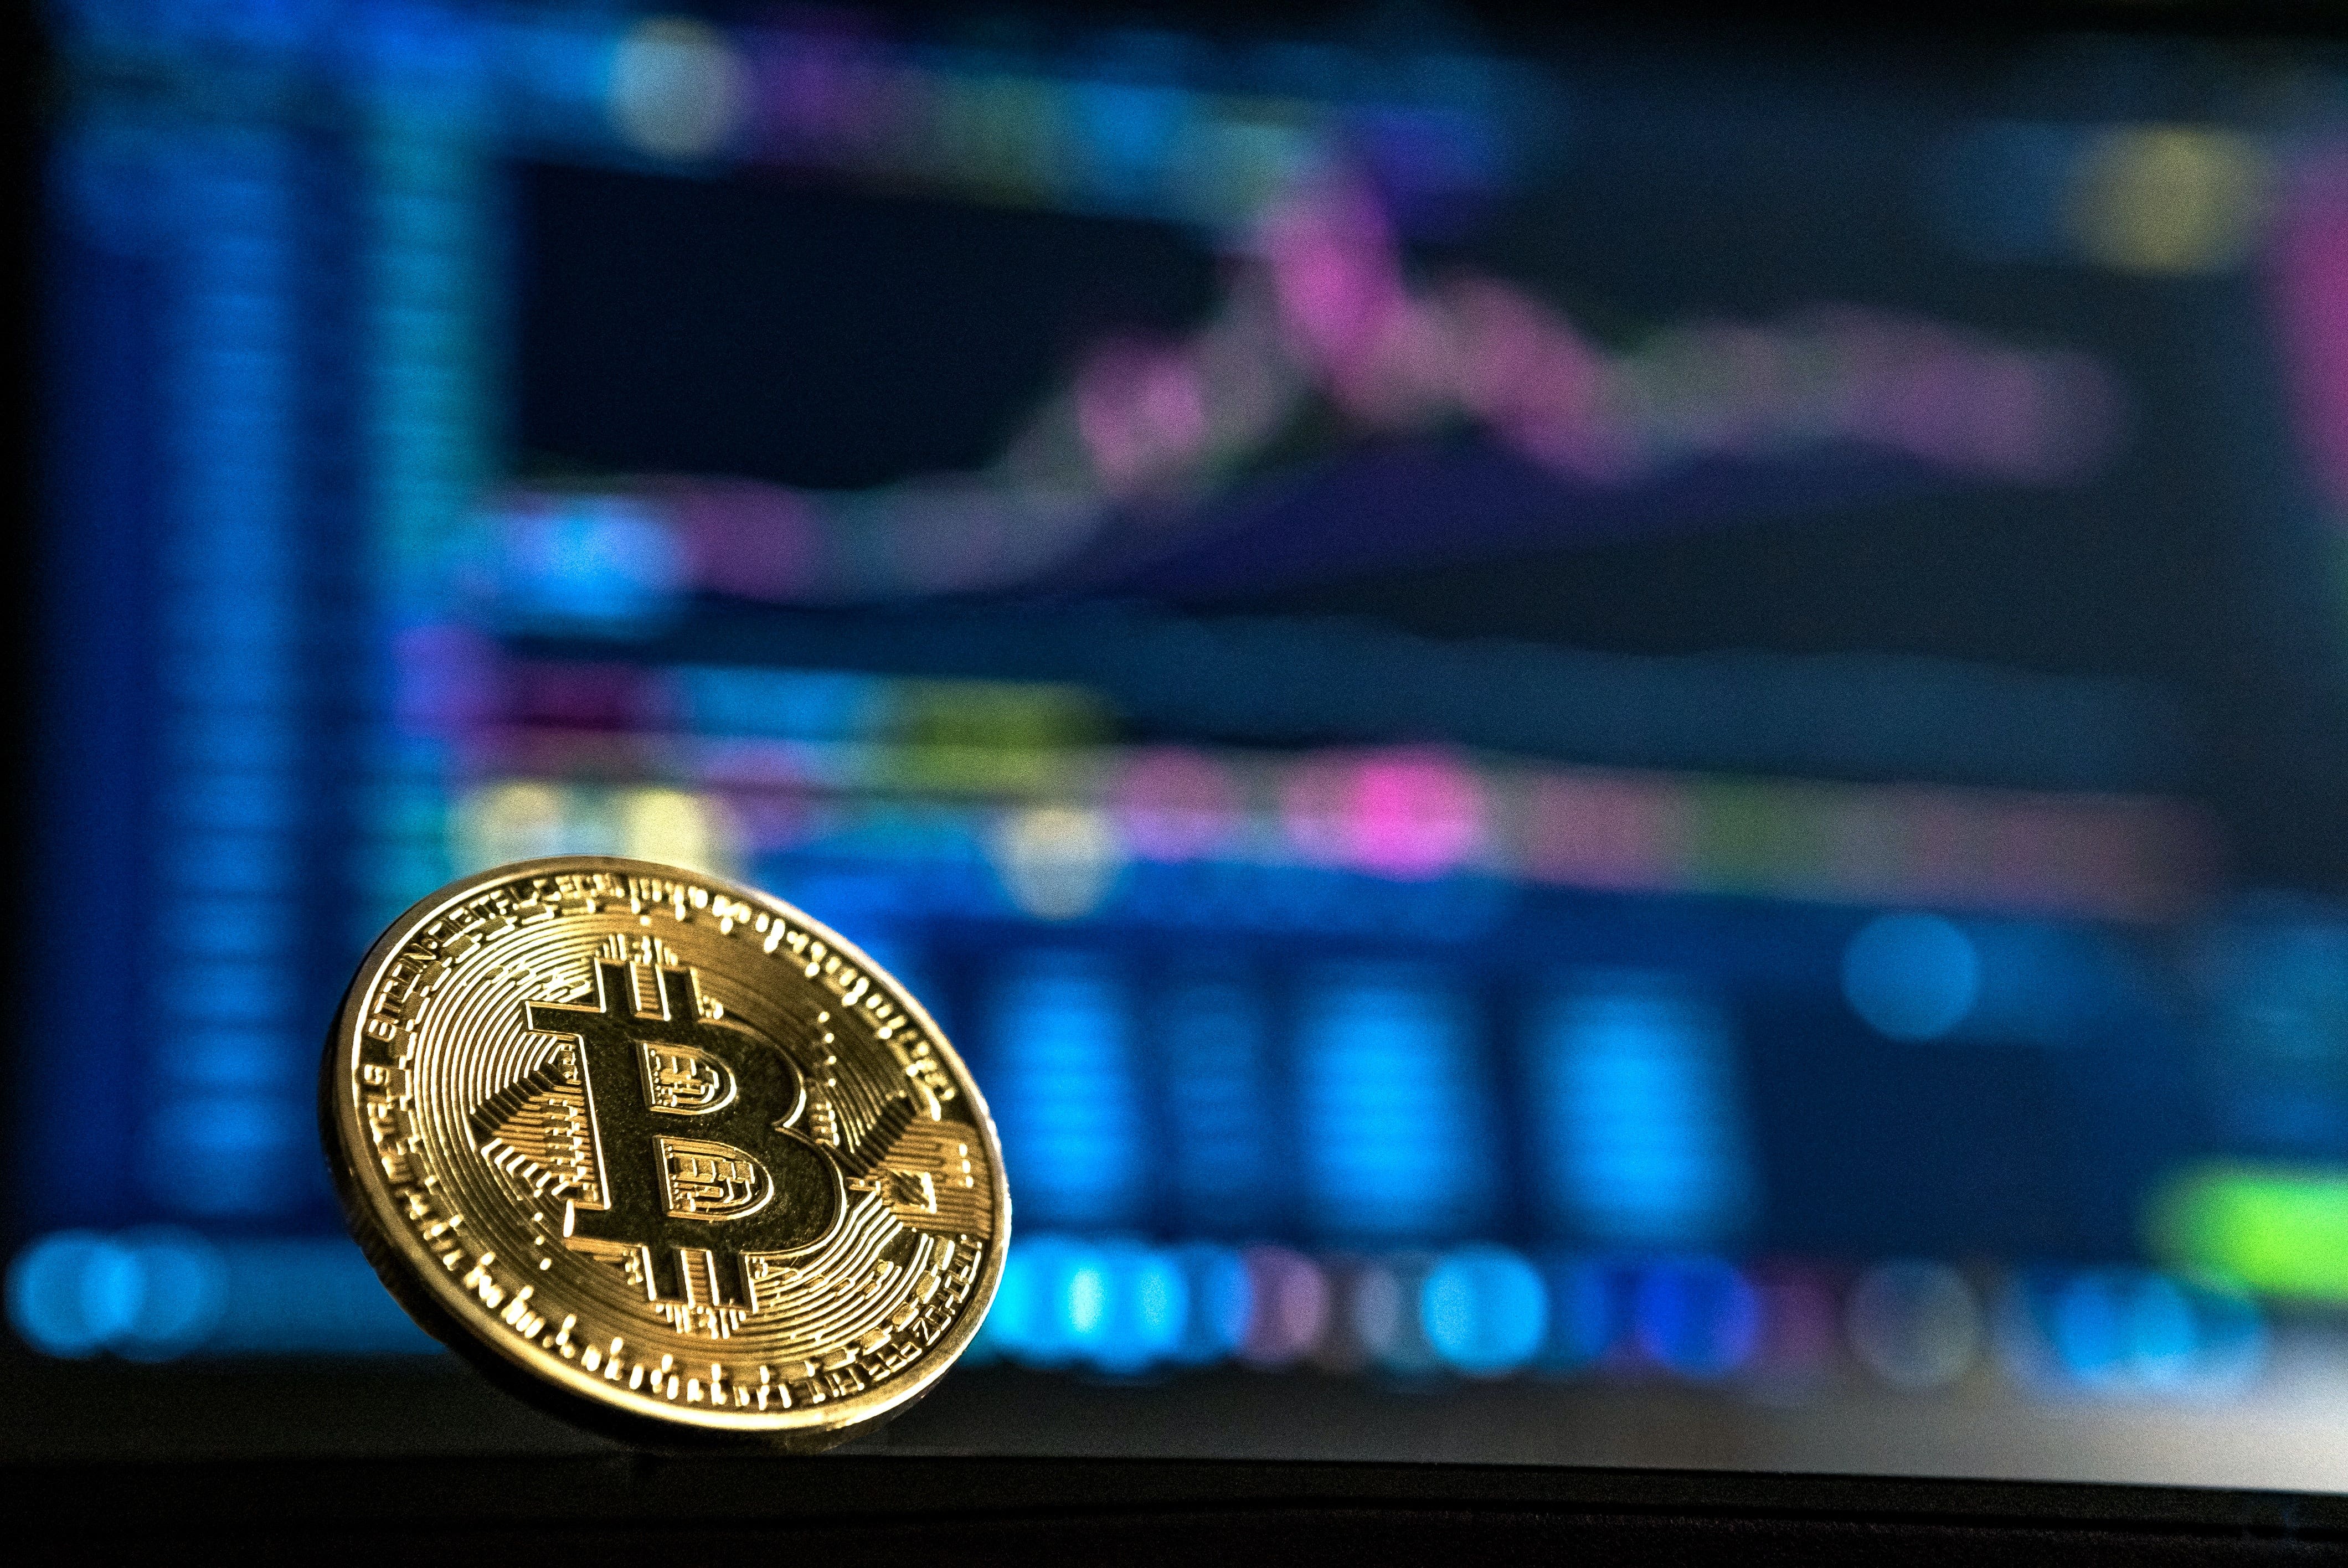 A Crypto-What? Poll Finds 1 In 10 Americans Unfamiliar With Cryptocurrencies